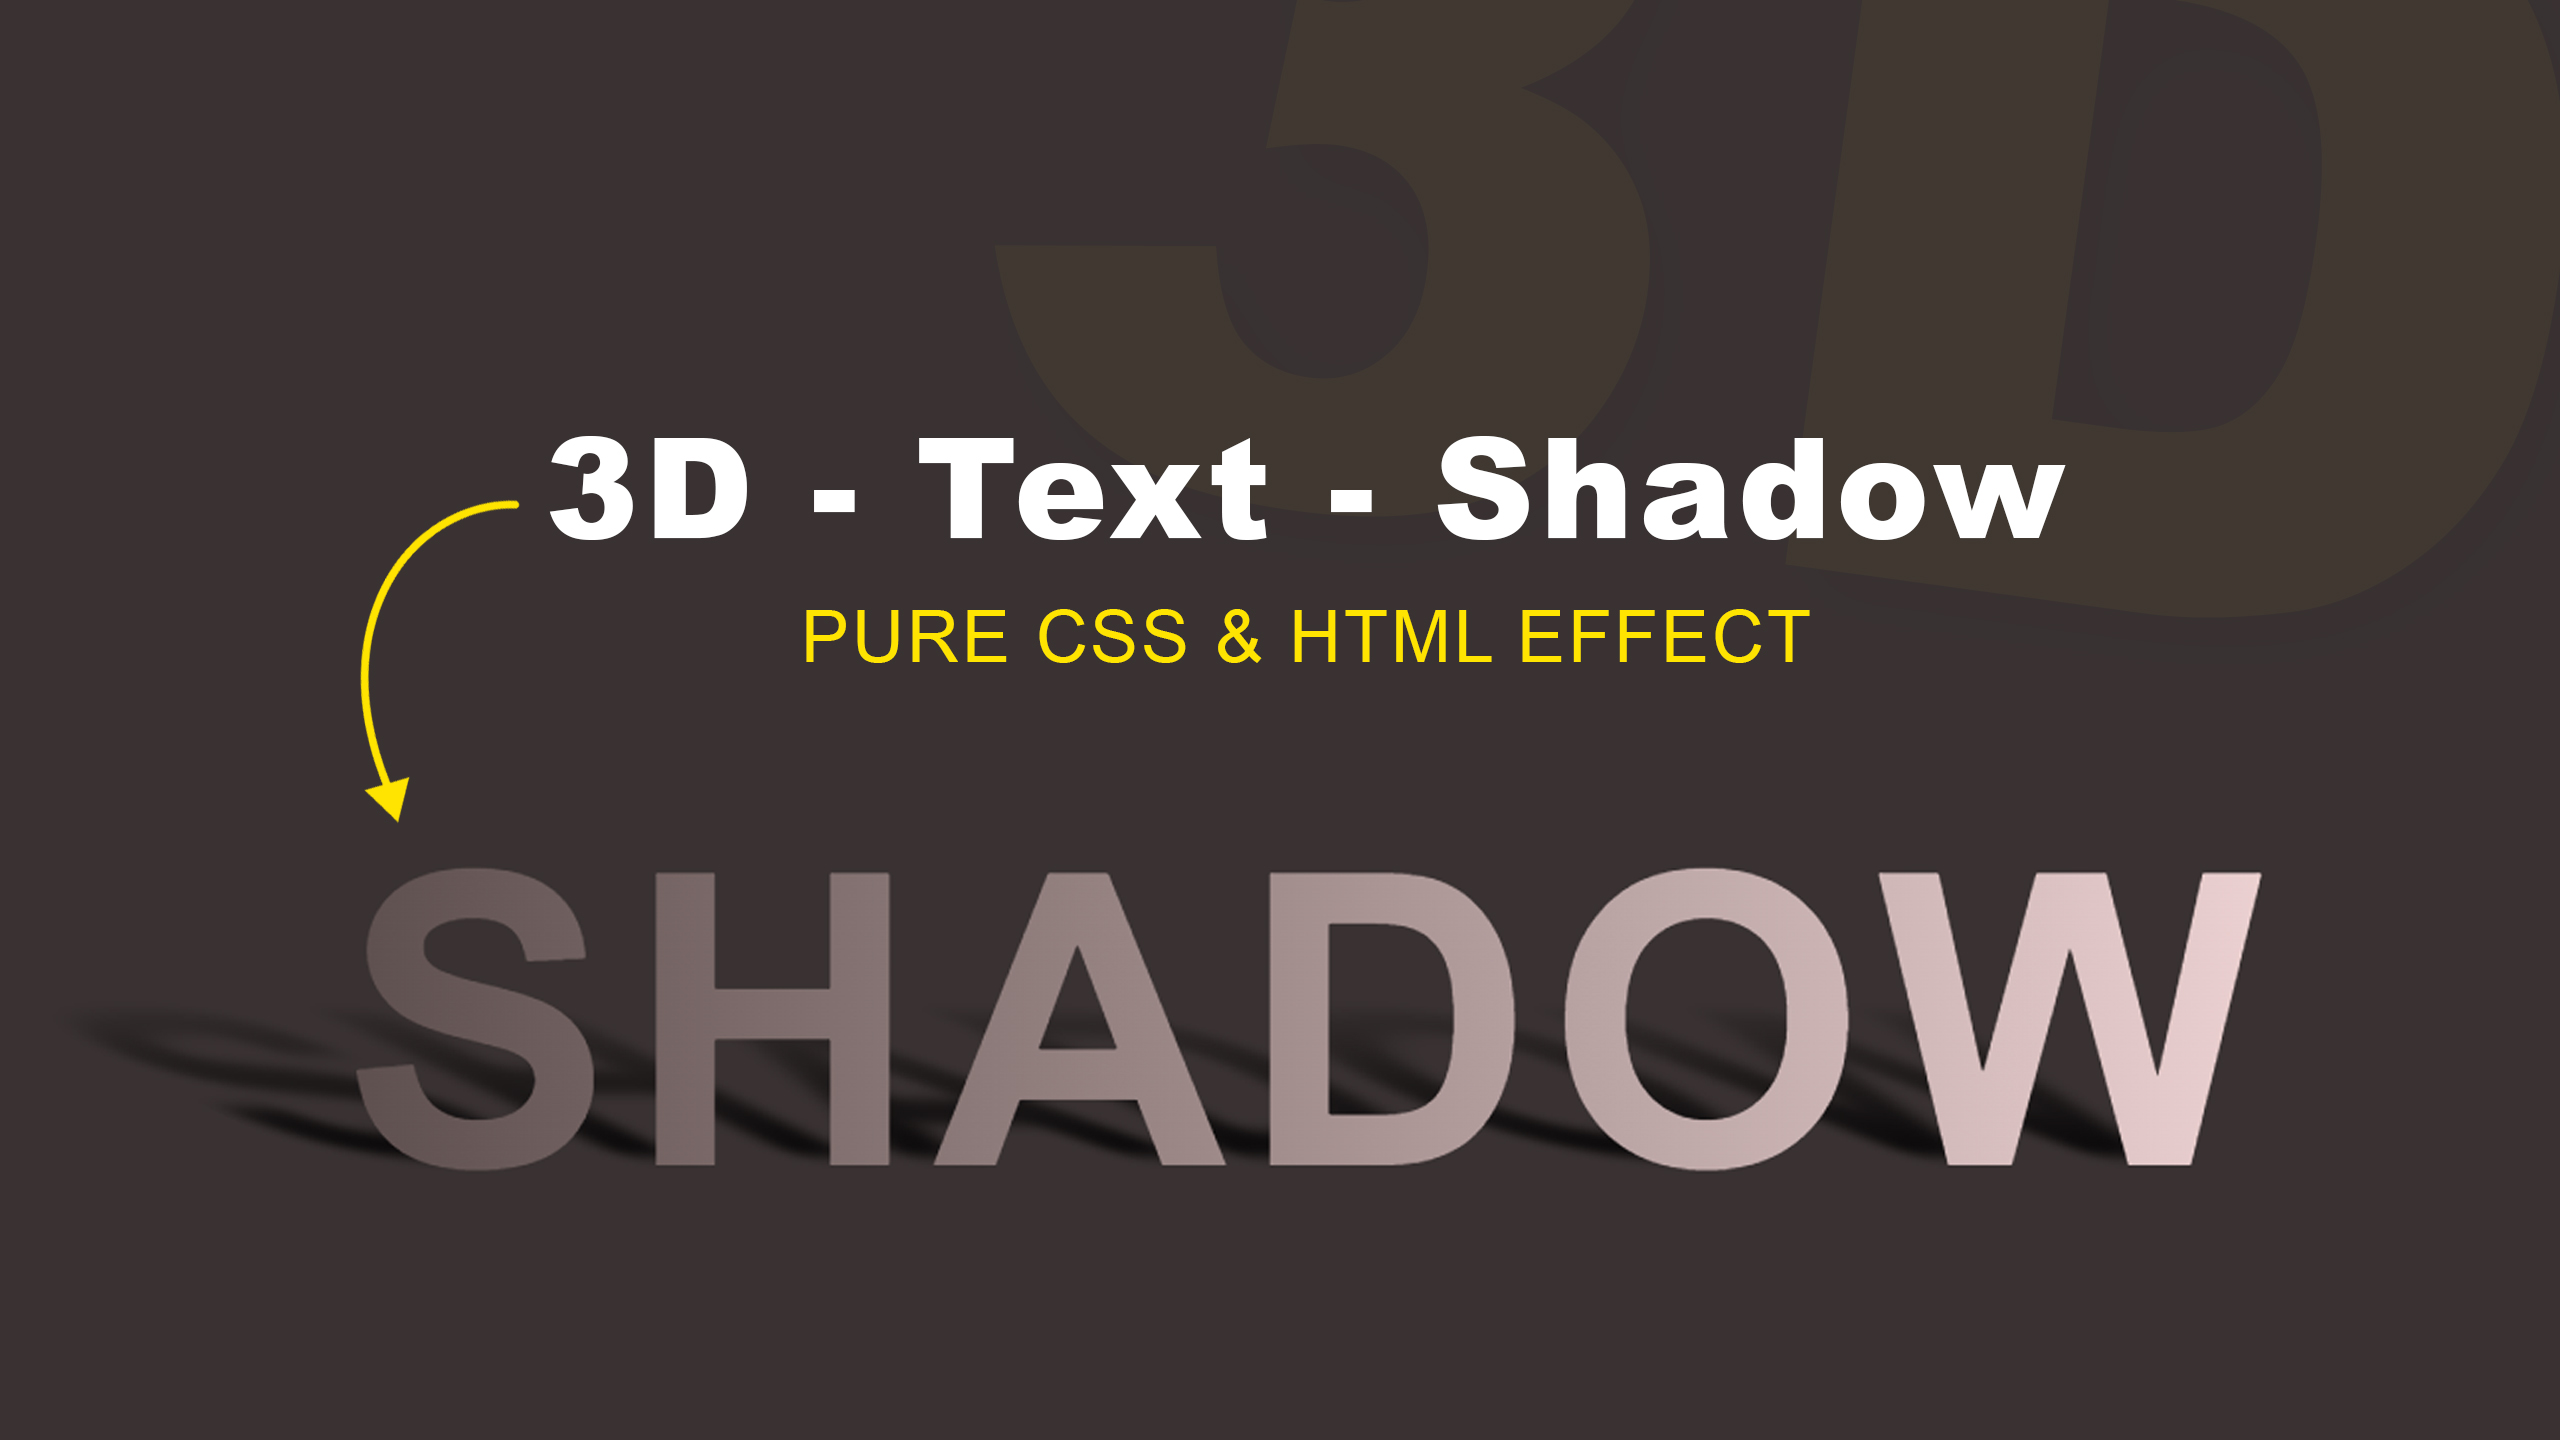 Text Shadow CSS. Text Shadow. Text-Shadow html. Шедоу текст